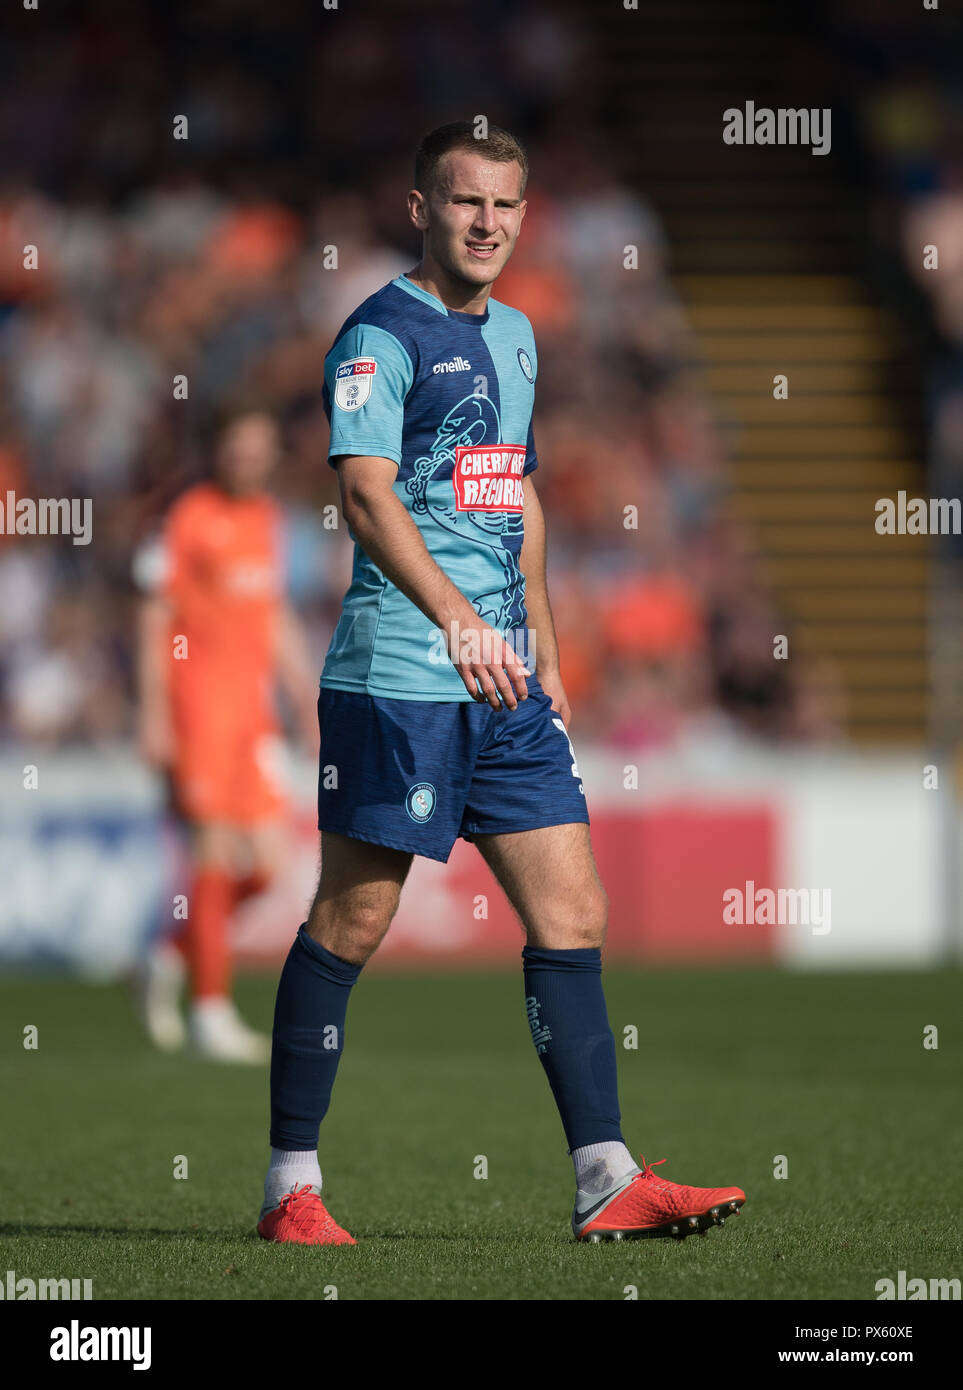 Bryn Morris (on loan from Shrewsbury Town) of Wycombe Wanderers during the Sky Bet League 1 match between Wycombe Wanderers and Luton Town at Adams Pa Stock Photo